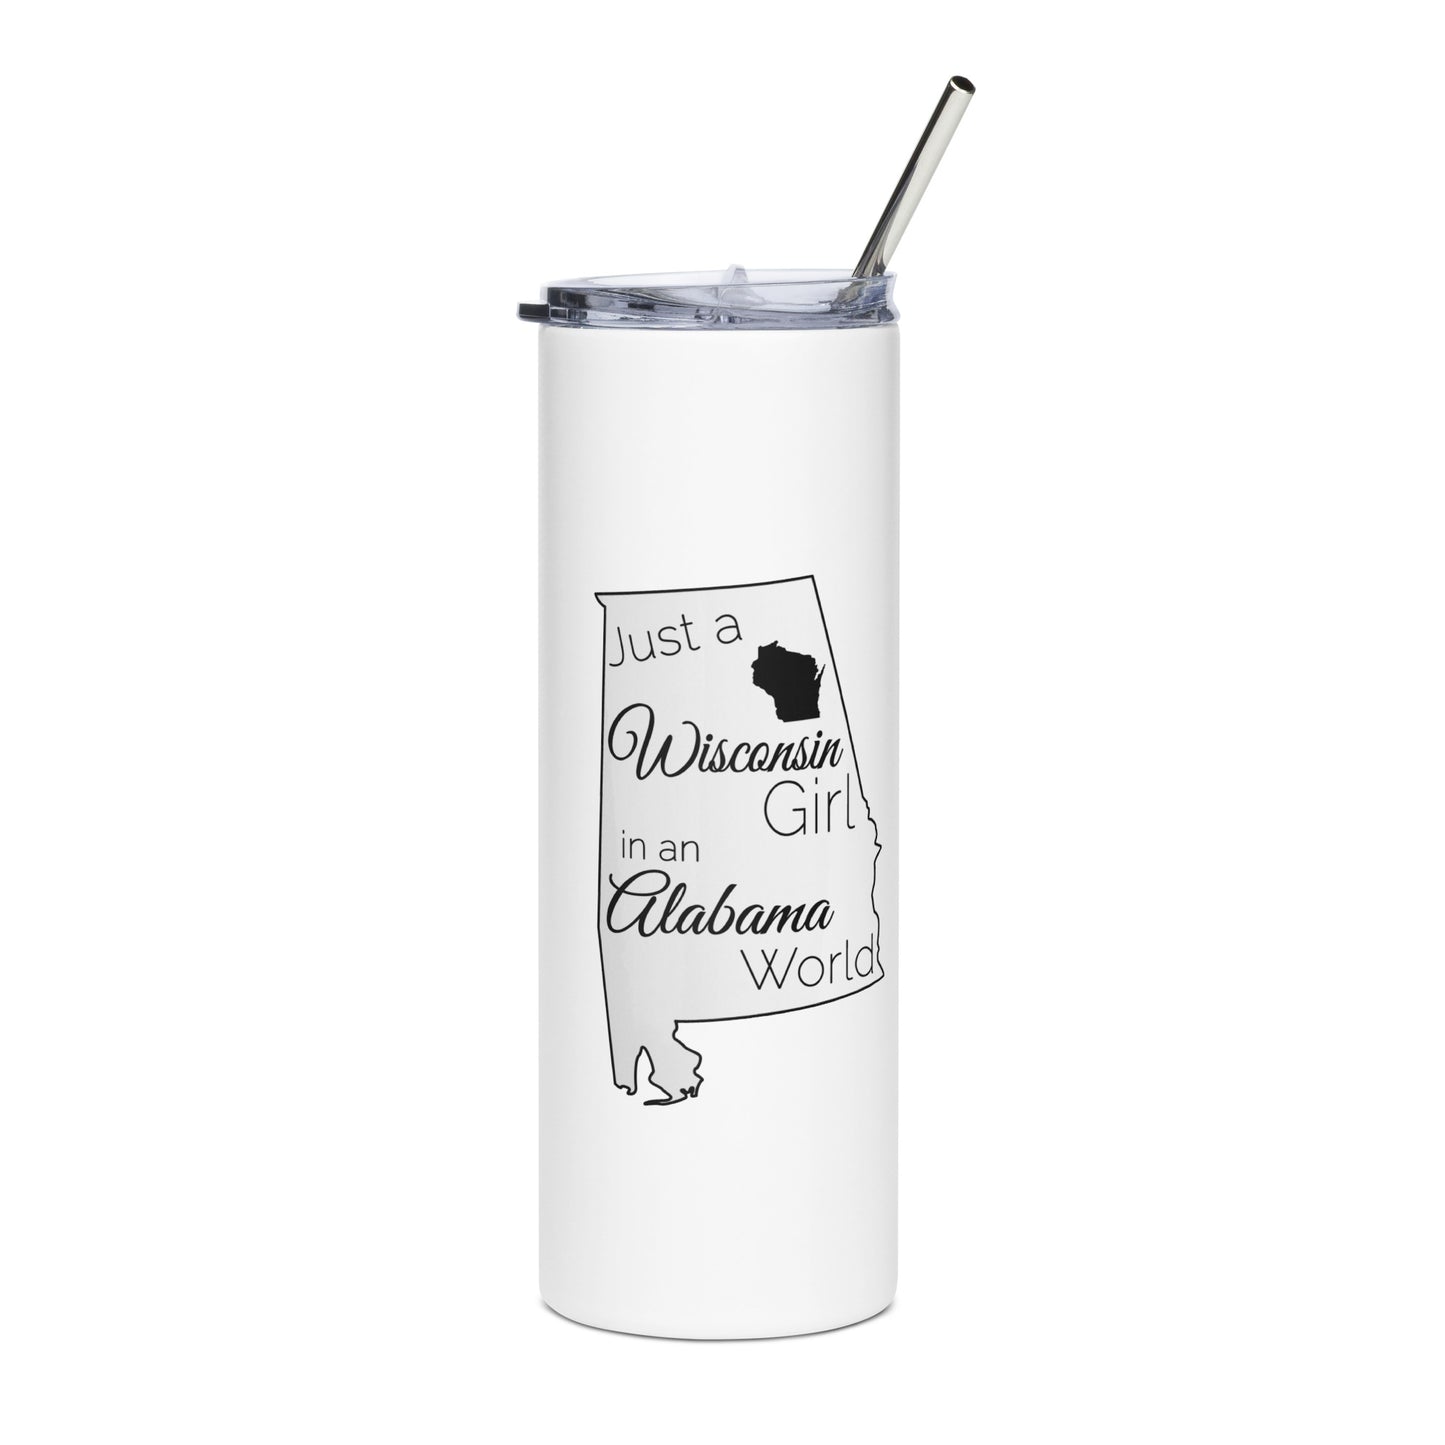 Just a Wisconsin Girl in an Alabama World Stainless steel tumbler